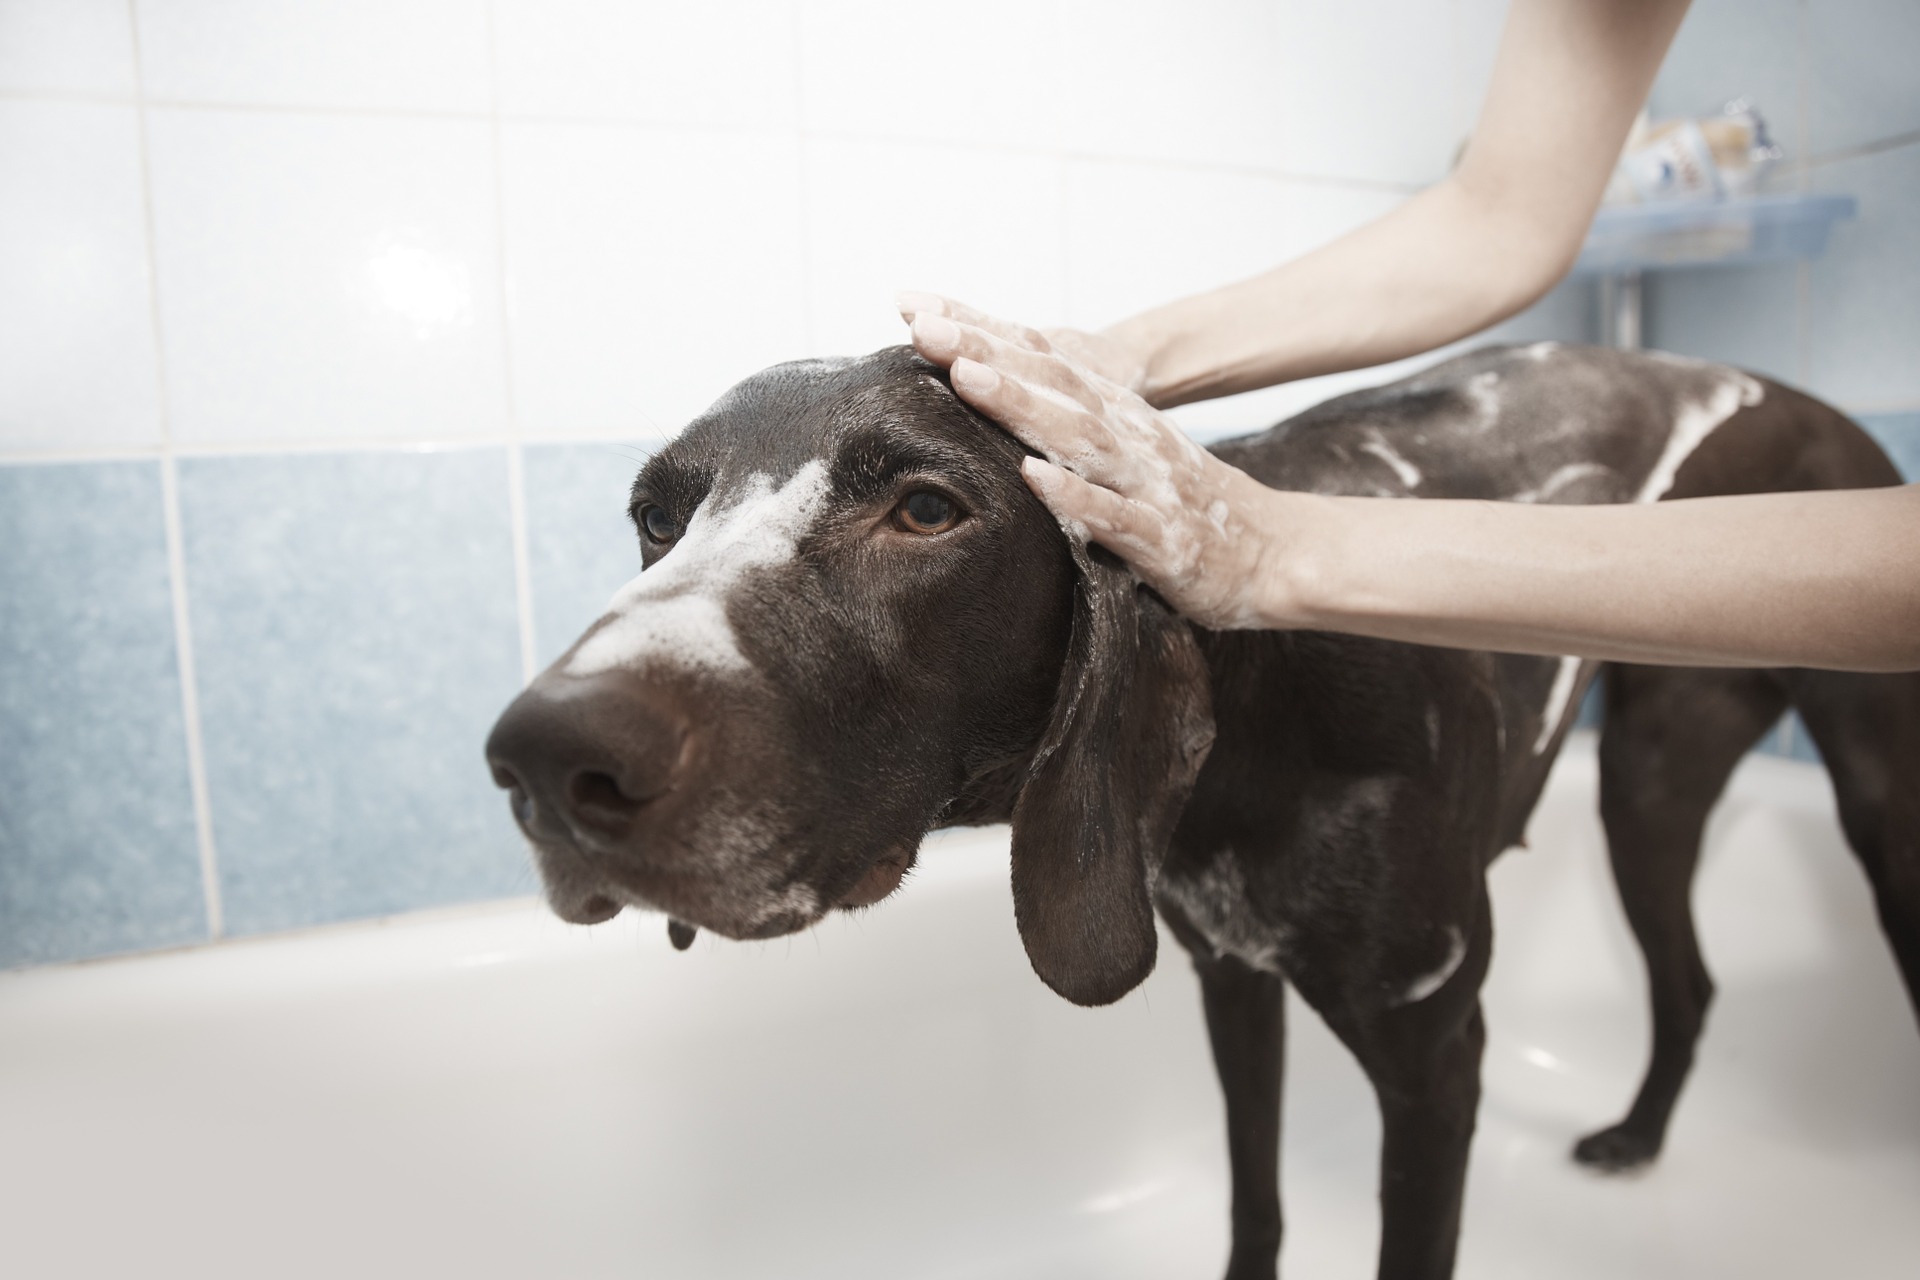 To clean your dog's ears effectively, you will need a gentle veterinary ear cleaning solution and gauze squares or cotton balls (no cotton swabs!).